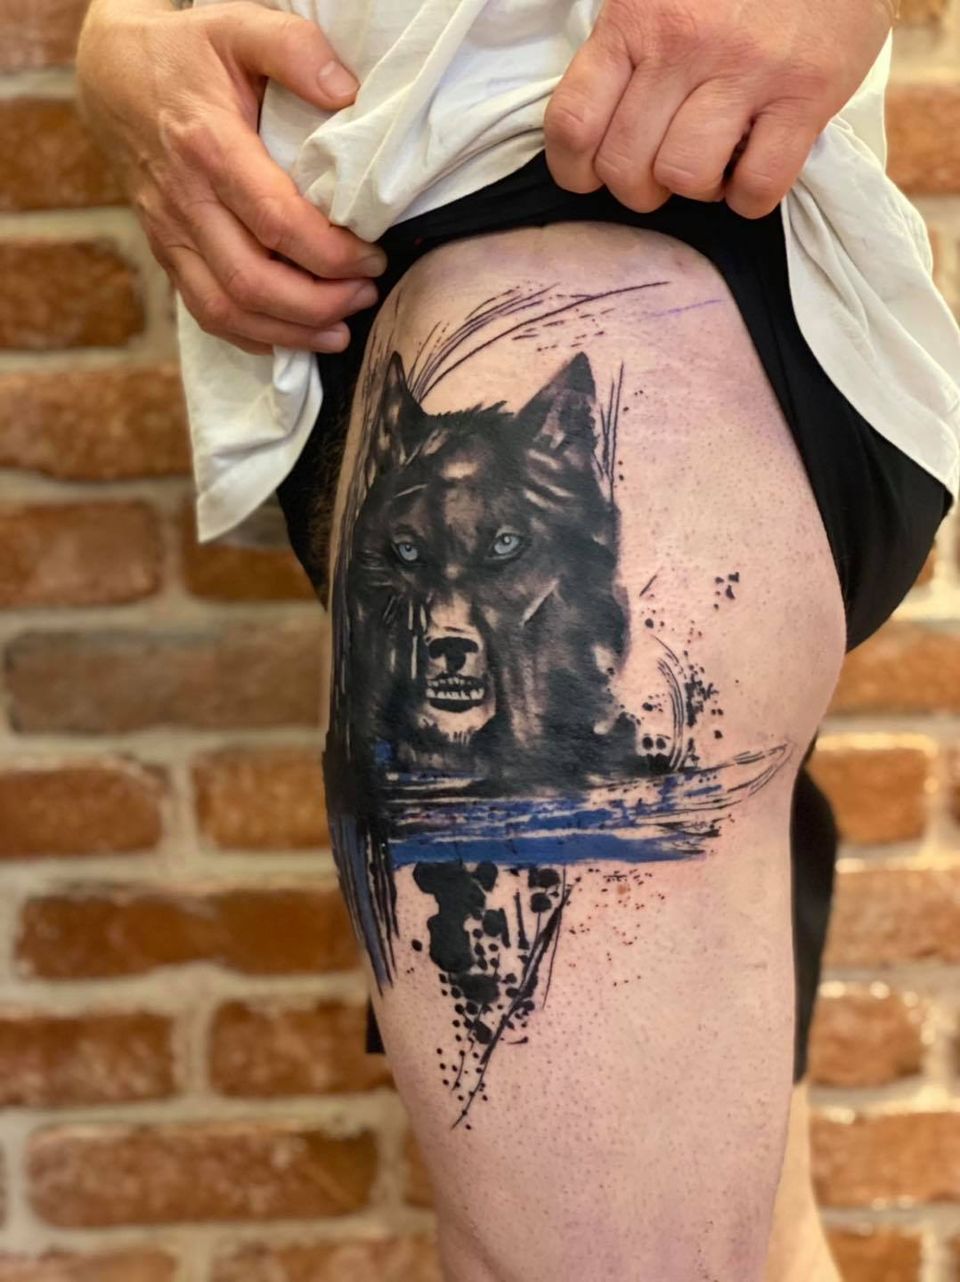 Black dog depression tattoo (What it means)